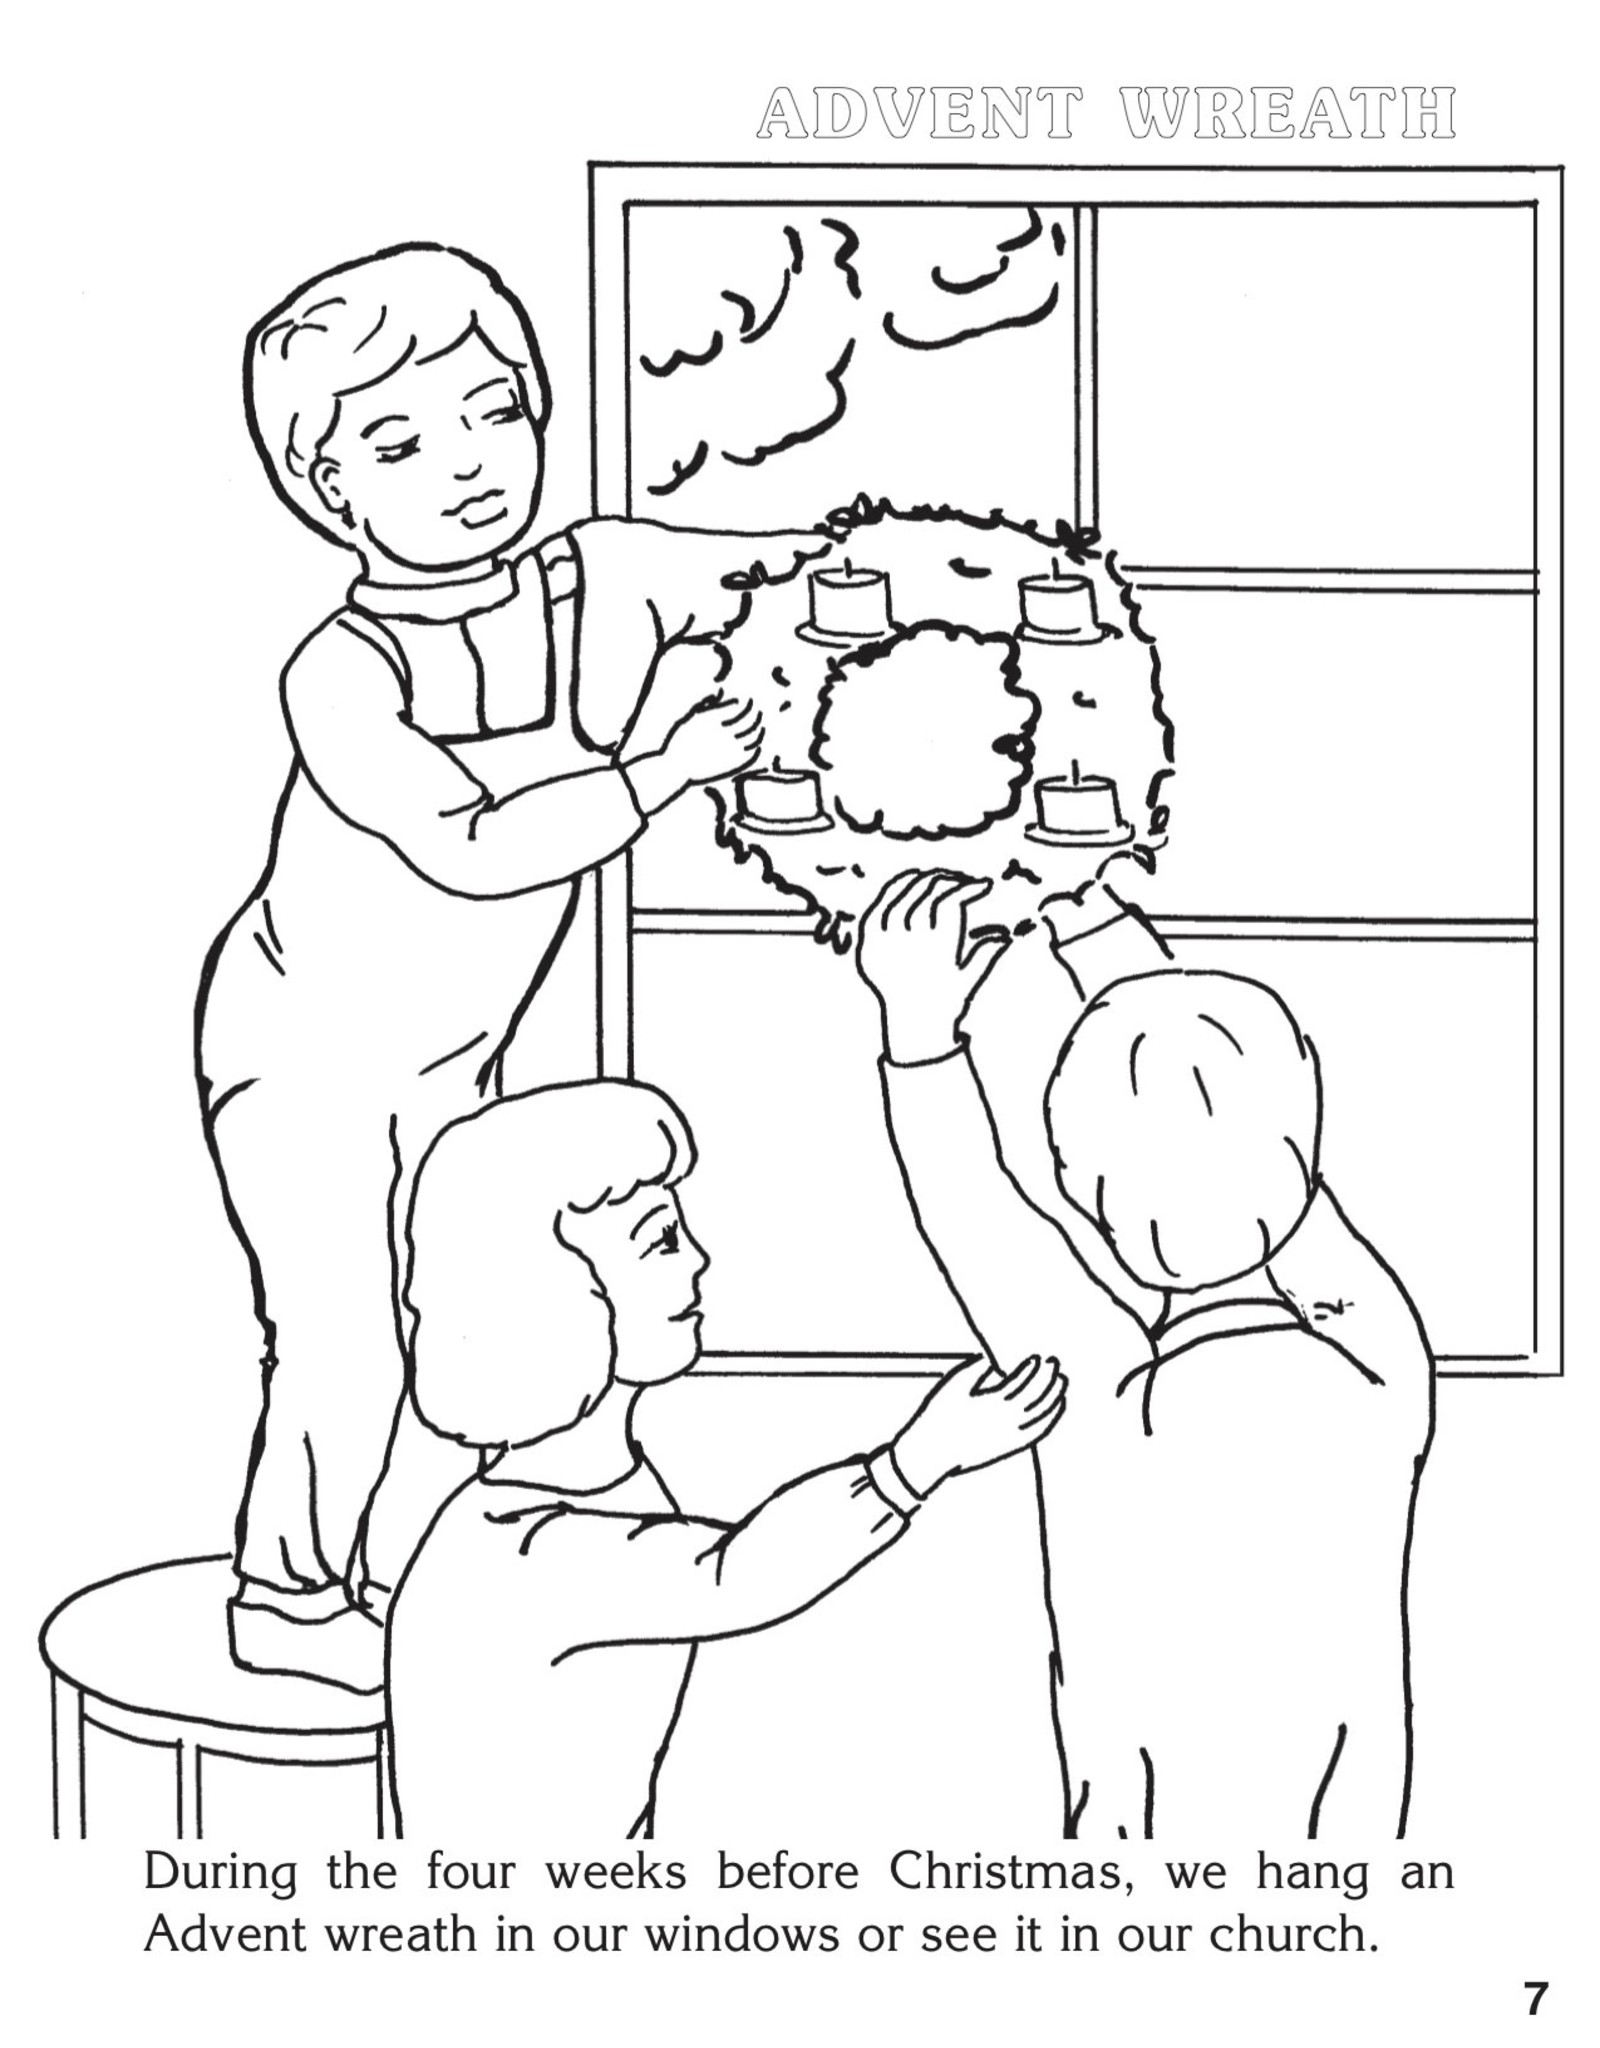 Catholic Book Publishing Coloring Book About Advent